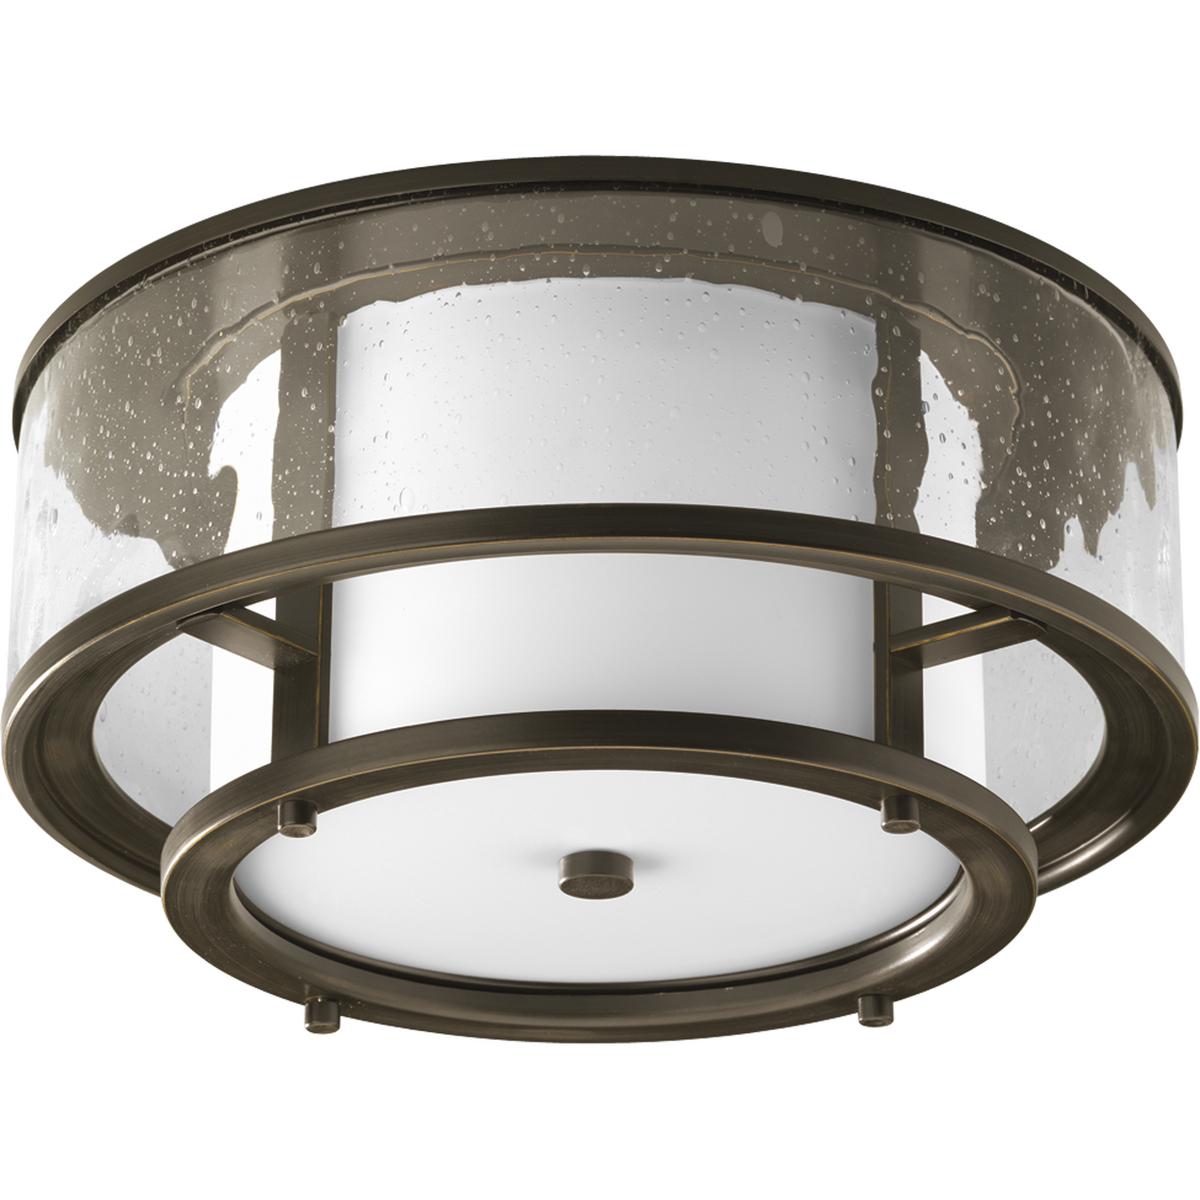 Hubbell P3942-20 Discover the antique nautical antique charm of this Bay Court Collection Two-Light 15” Flush Mount. An etched glass diffuser is surrounded by a water glass gallery for a clean, beautiful, design. This contemporary interpretation of a classic light fixture